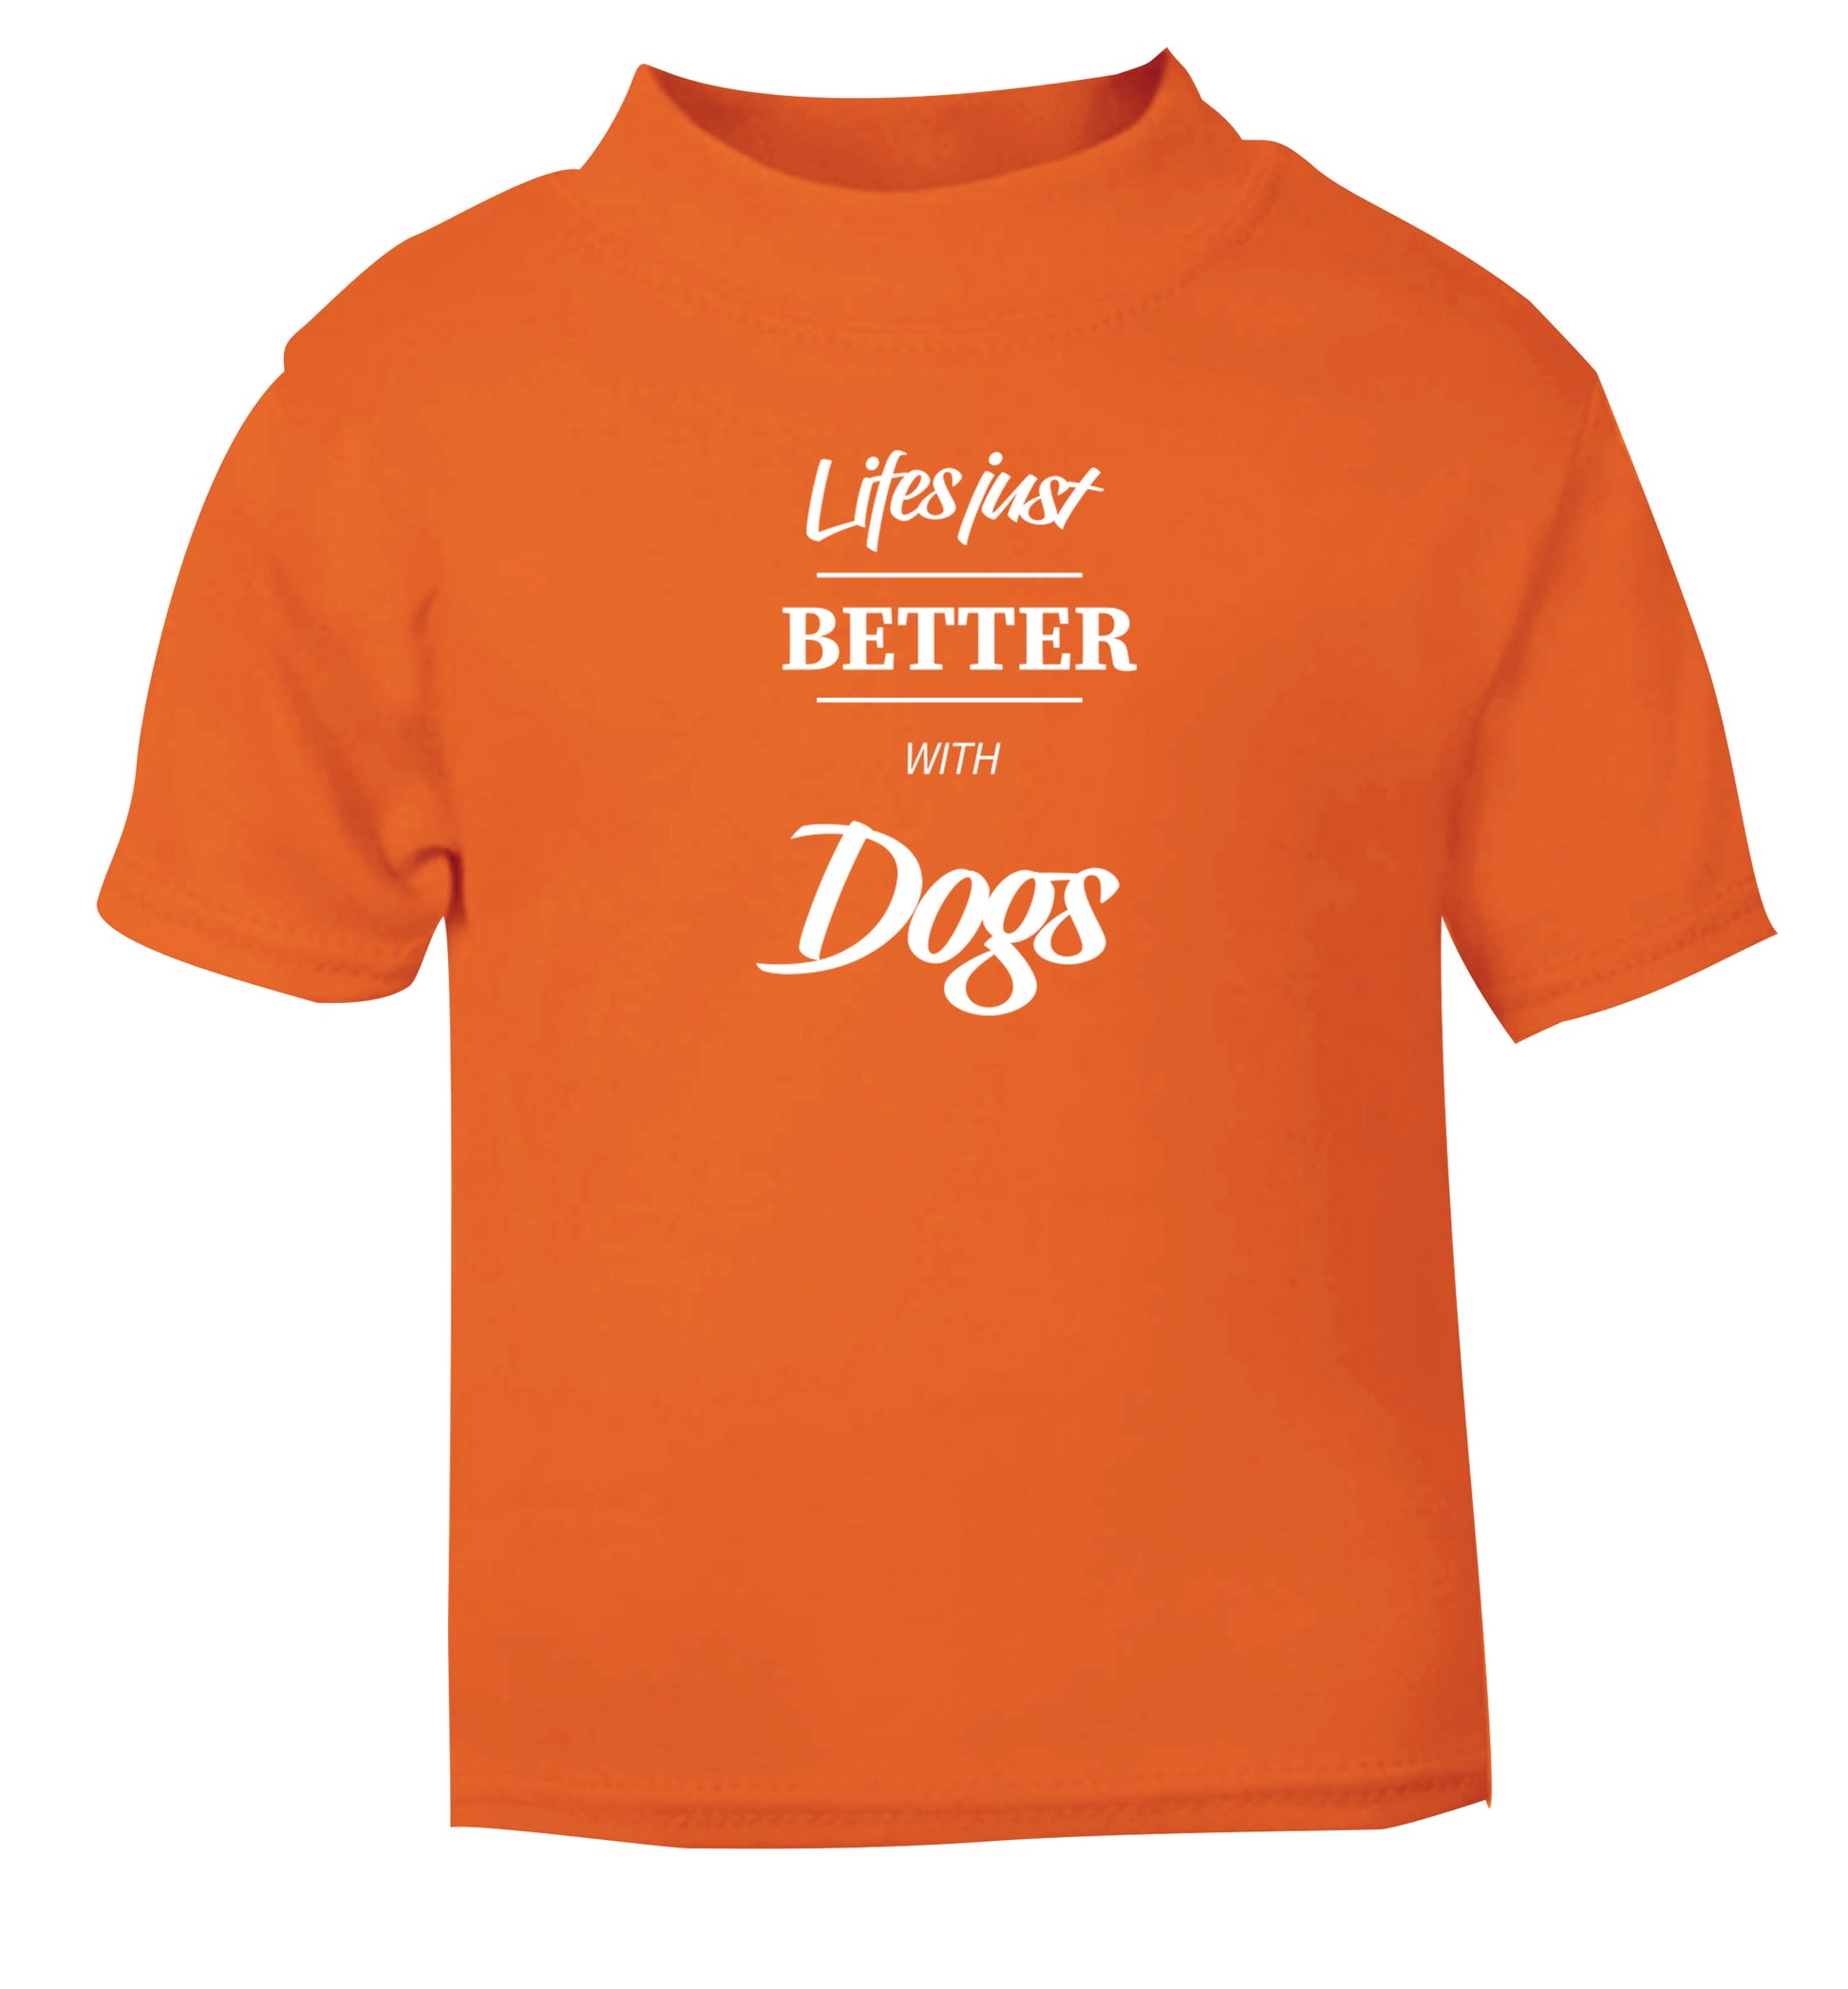 life is better with dogs orange Baby Toddler Tshirt 2 Years